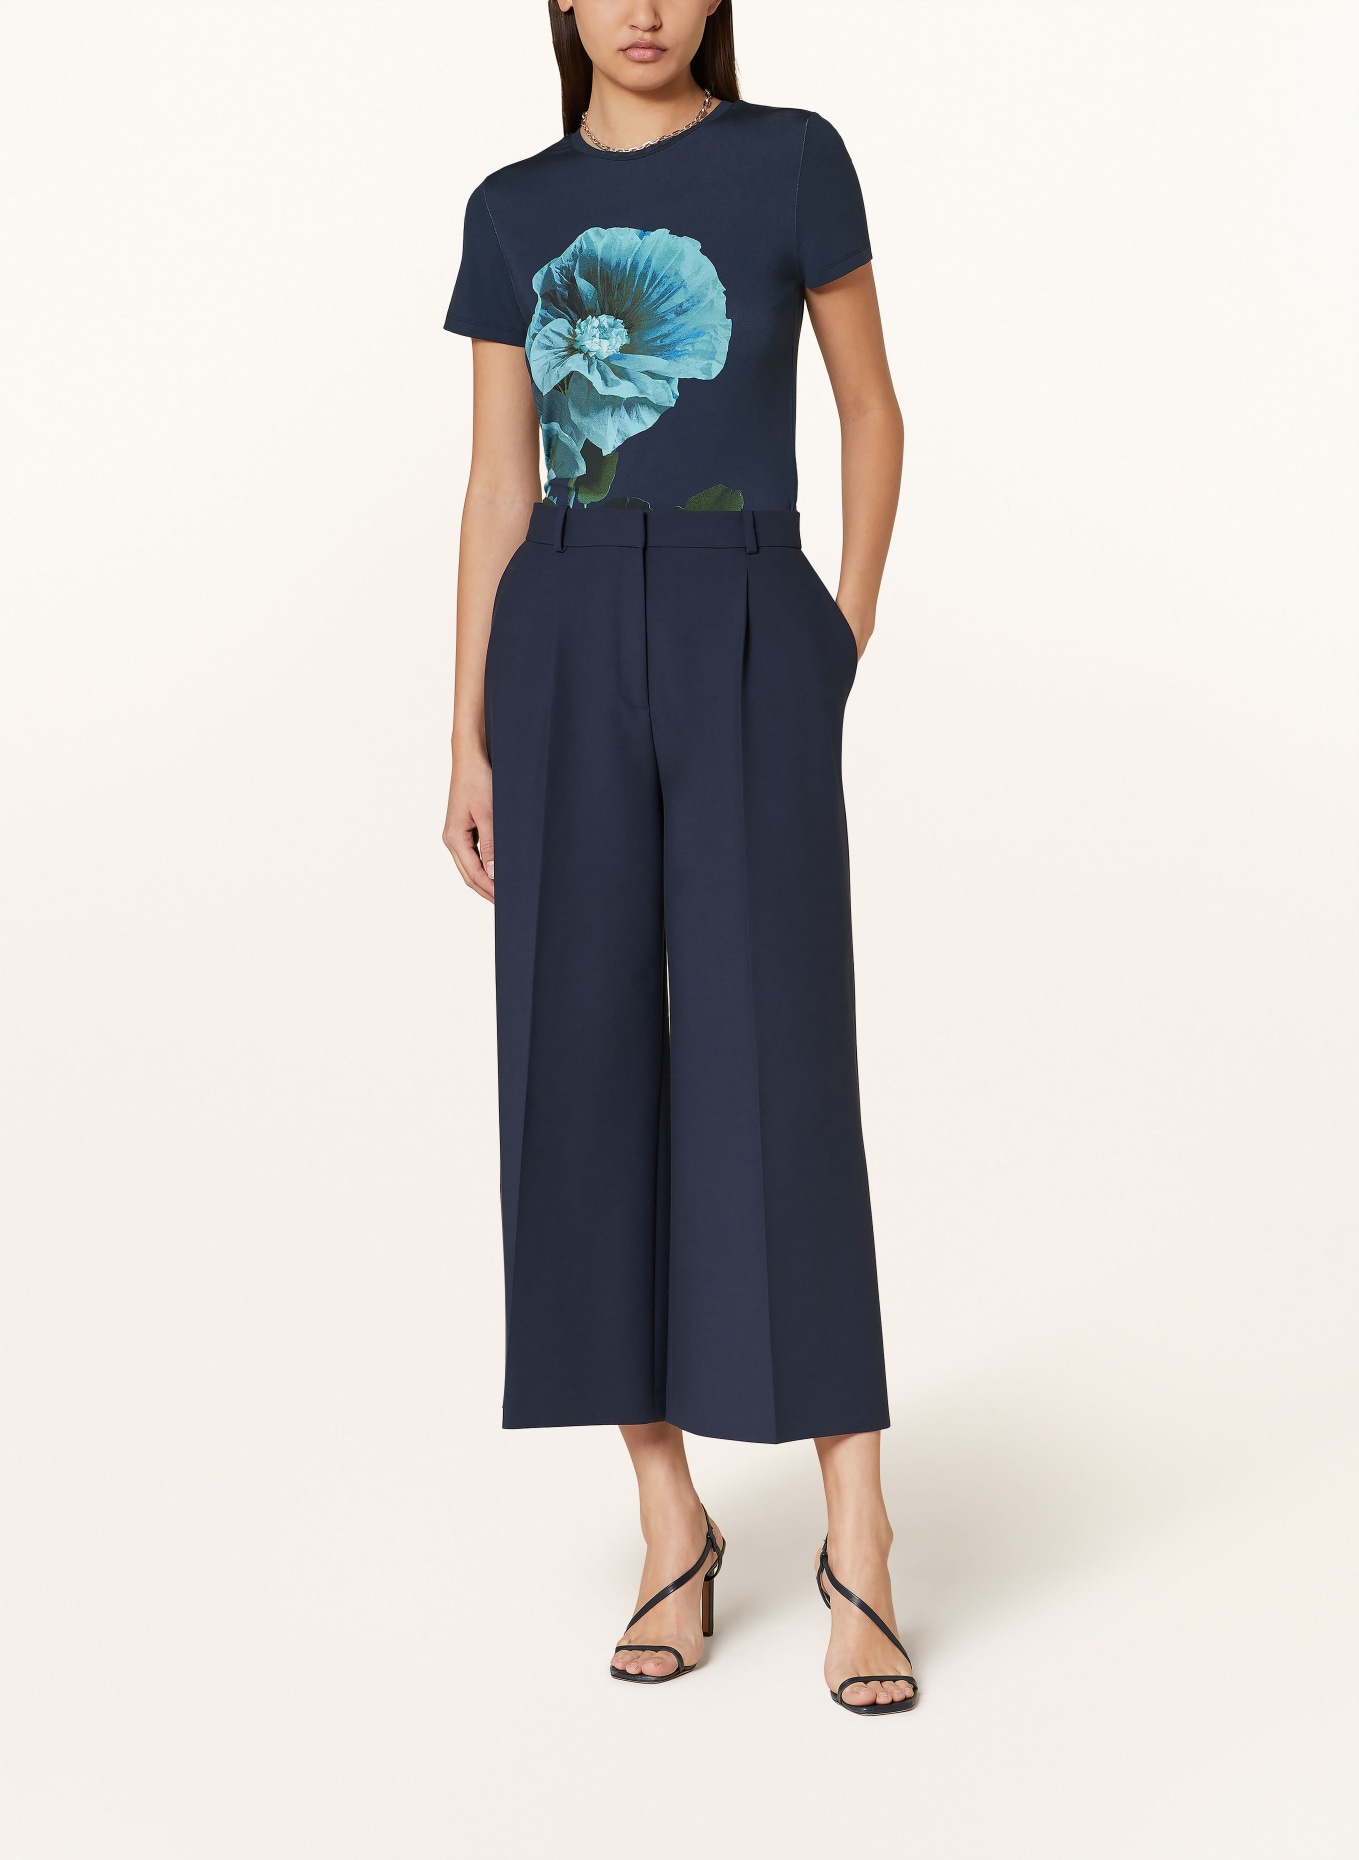 TED BAKER T-shirt MERIDI, Color: DARK BLUE/ GREEN/ TURQUOISE (Image 2)